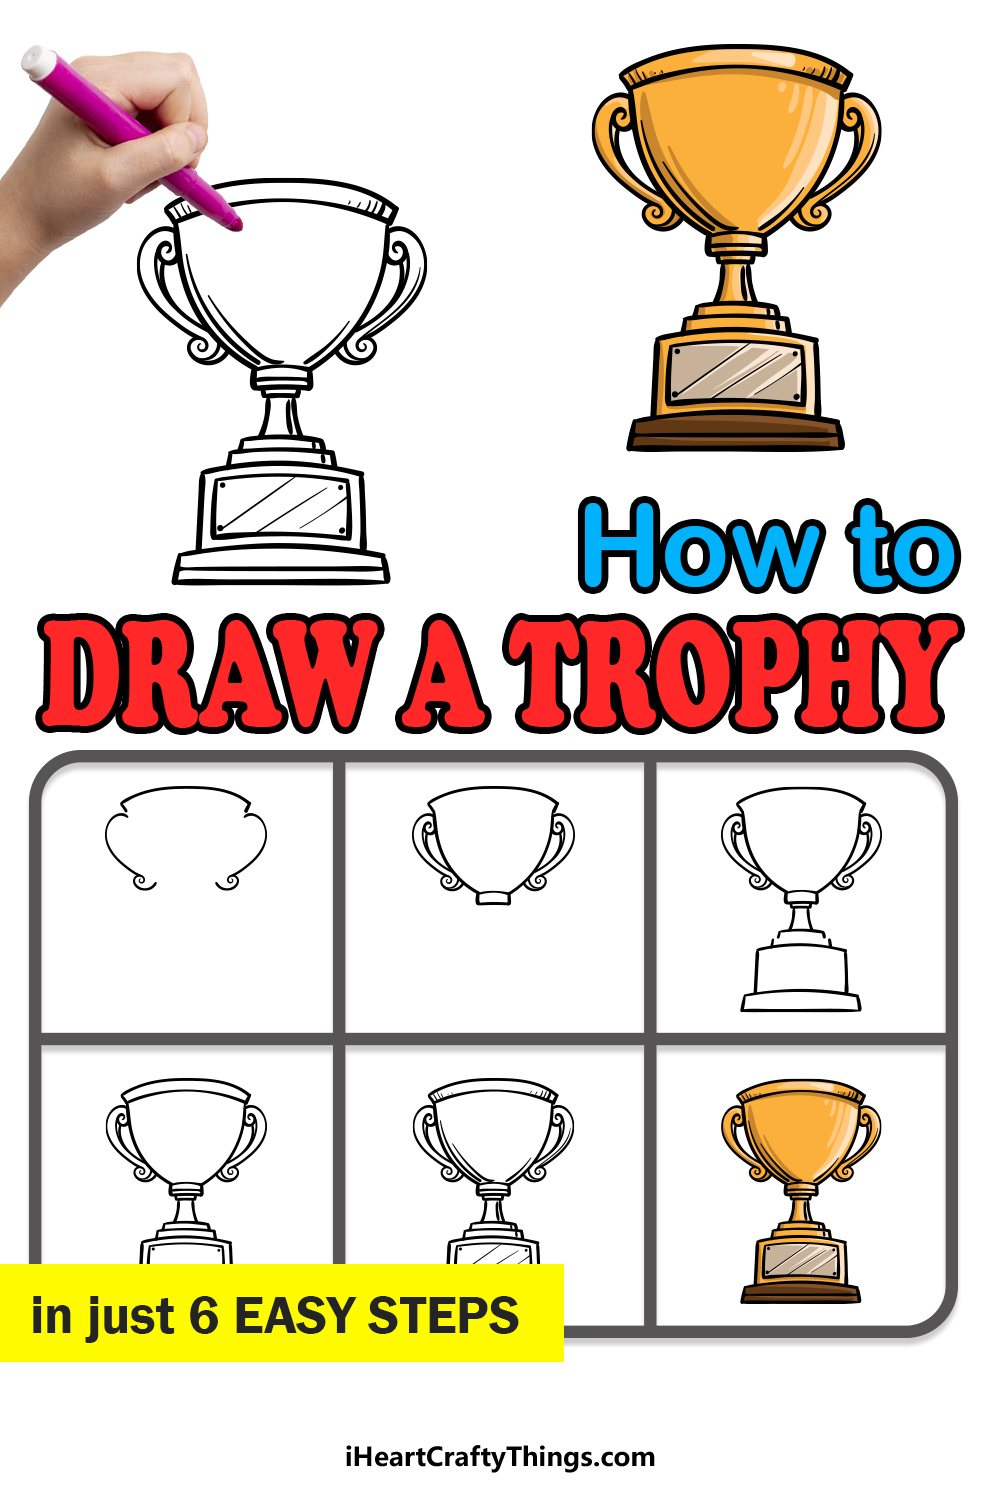 how to draw a trophy in 6 easy steps